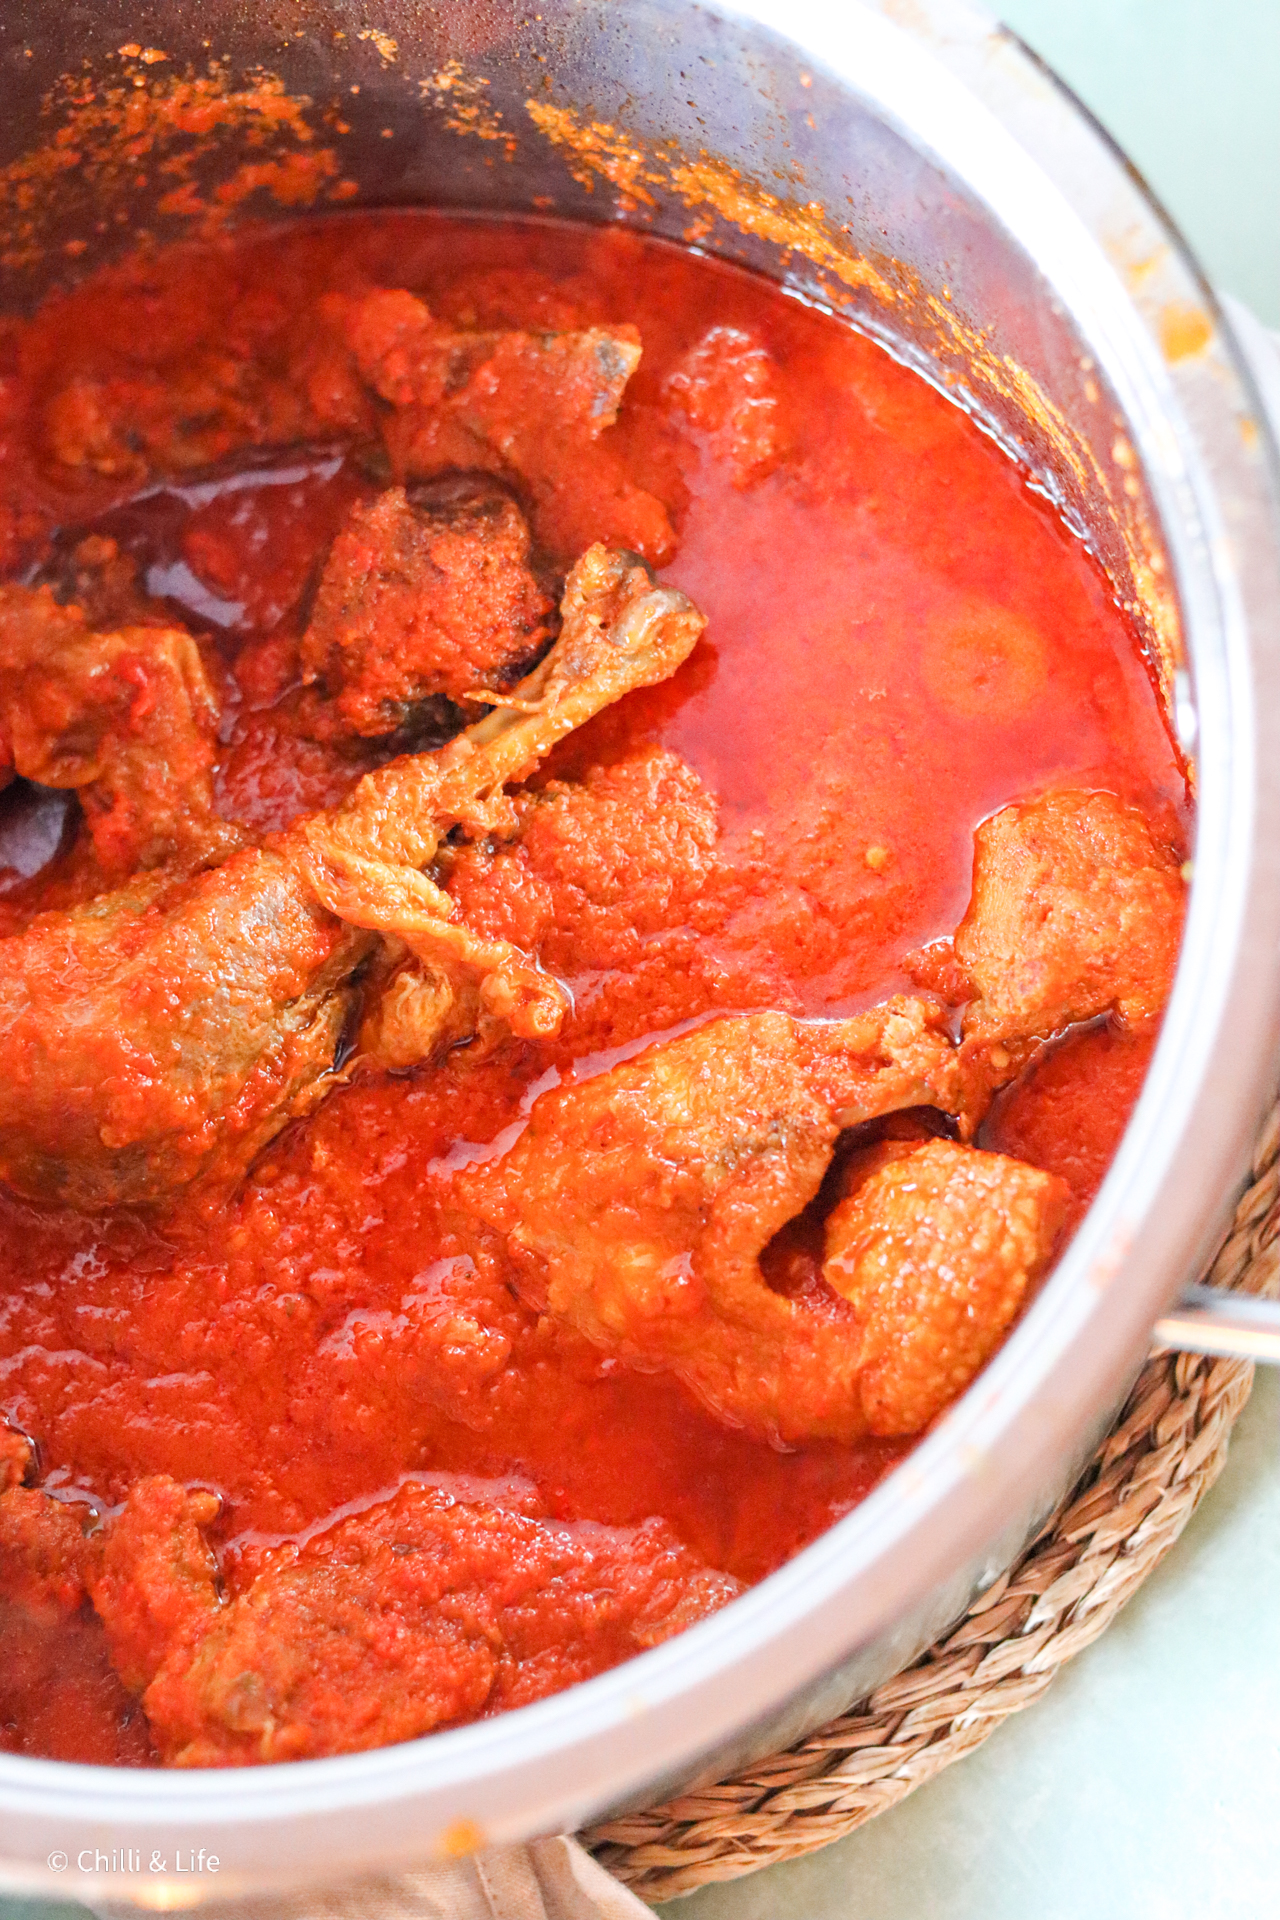 nigerian red stew with chicken and beef